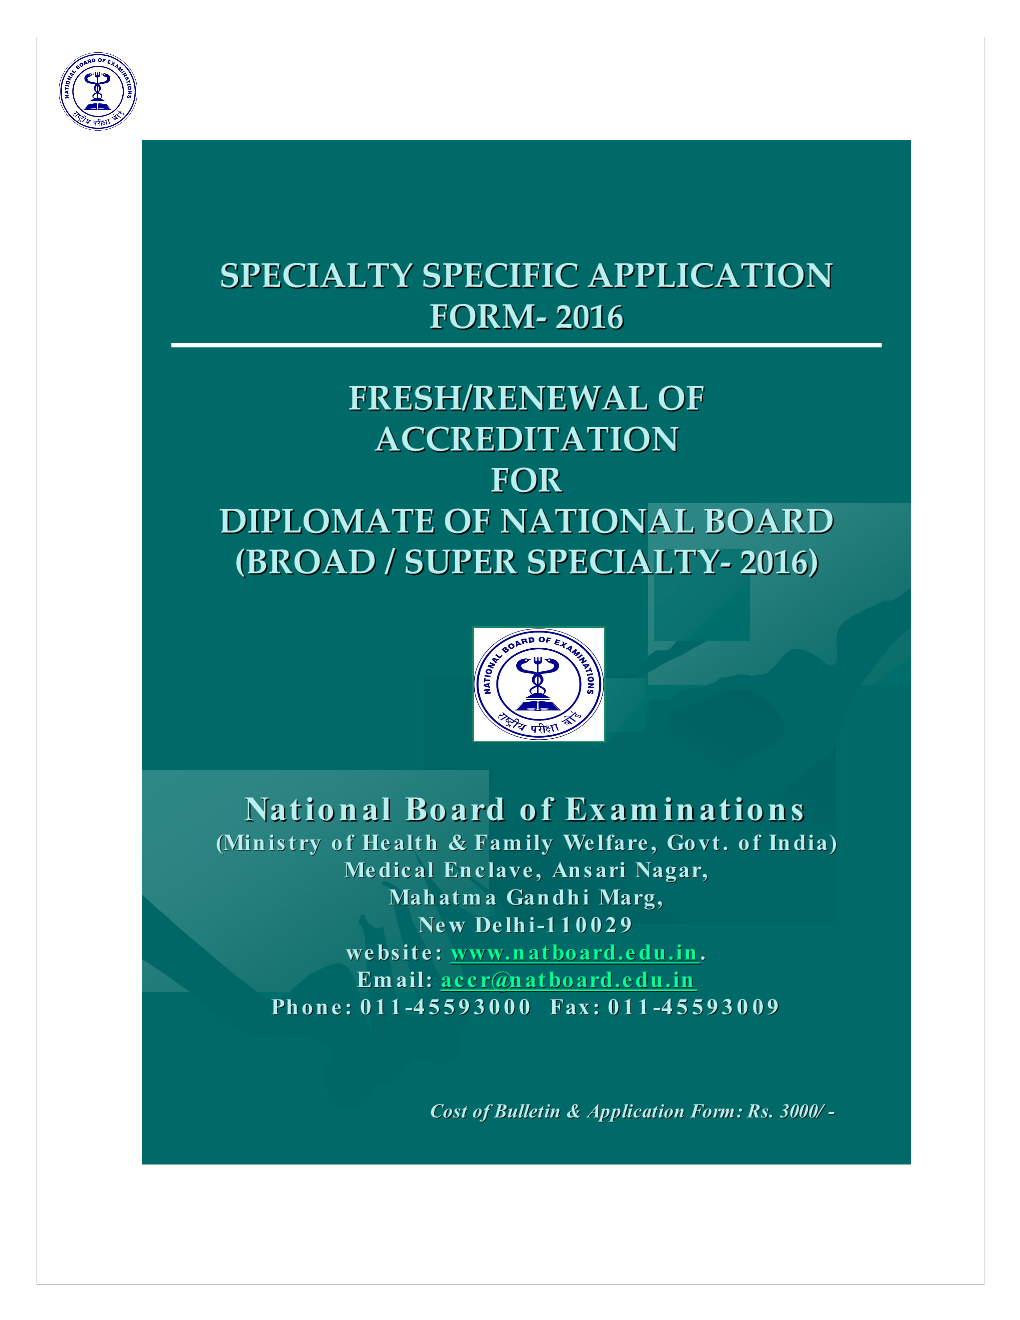 1.Guidelines for Drafting and Filing the Application Form for Accreditation